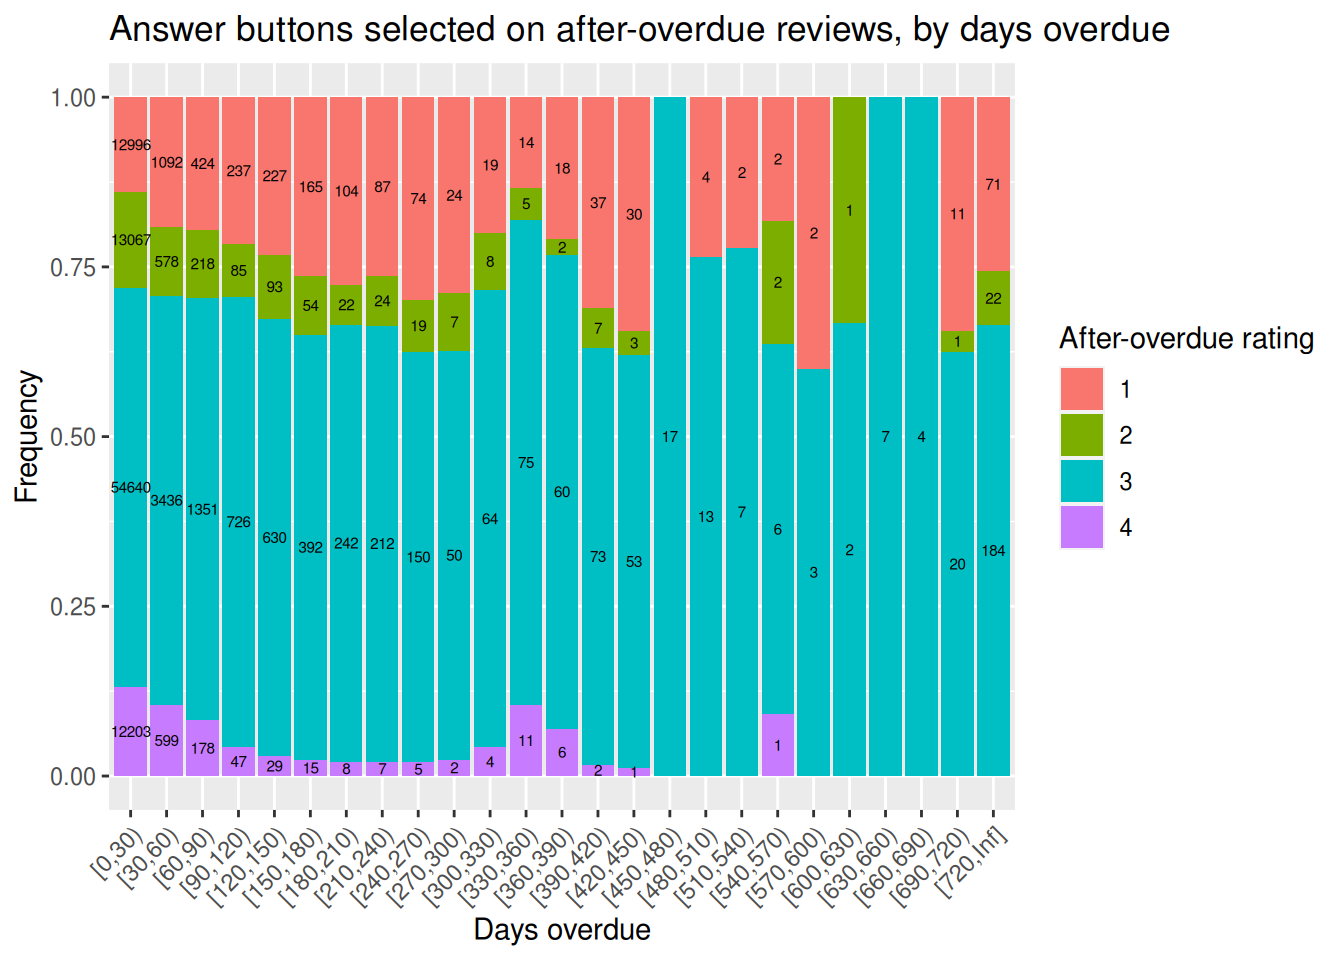 Bar graph of answer buttons selected on after-overdue reviews, by days overdue